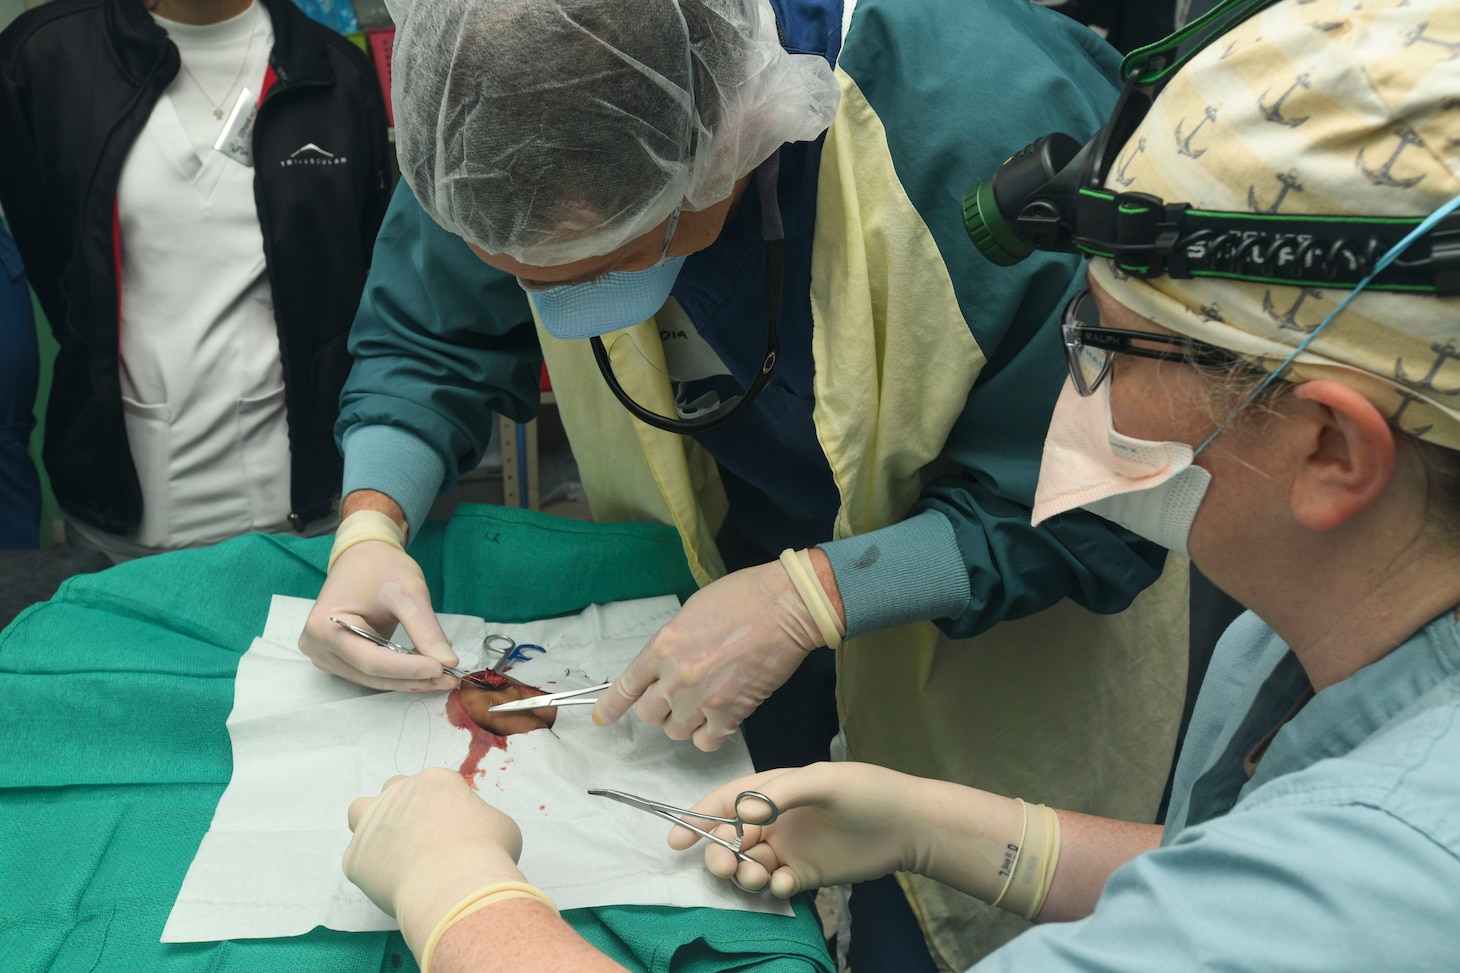 240227-N-FB730-1078 SAN PEDRO SULA, HONDURAS (Feb. 27, 2024) Surgeons with Expeditionary Medical Unit (EMU) 10 G remove stitches from a patient’s hand in the trauma bay at Hospital Nacional Mario Catarino Rivas, San Pedro Sula, Honduras on Feb. 27, 2024. In collaboration with joint forces and the host nation, EMU 10 G conducted its first Global Health Engagement in Honduras enhances expeditionary core skills and exchanges knowledge with Honduran healthcare professionals in a limited resource environment. (U.S. Navy photo by Mass Communication Specialist 2nd Class Justin Woods)